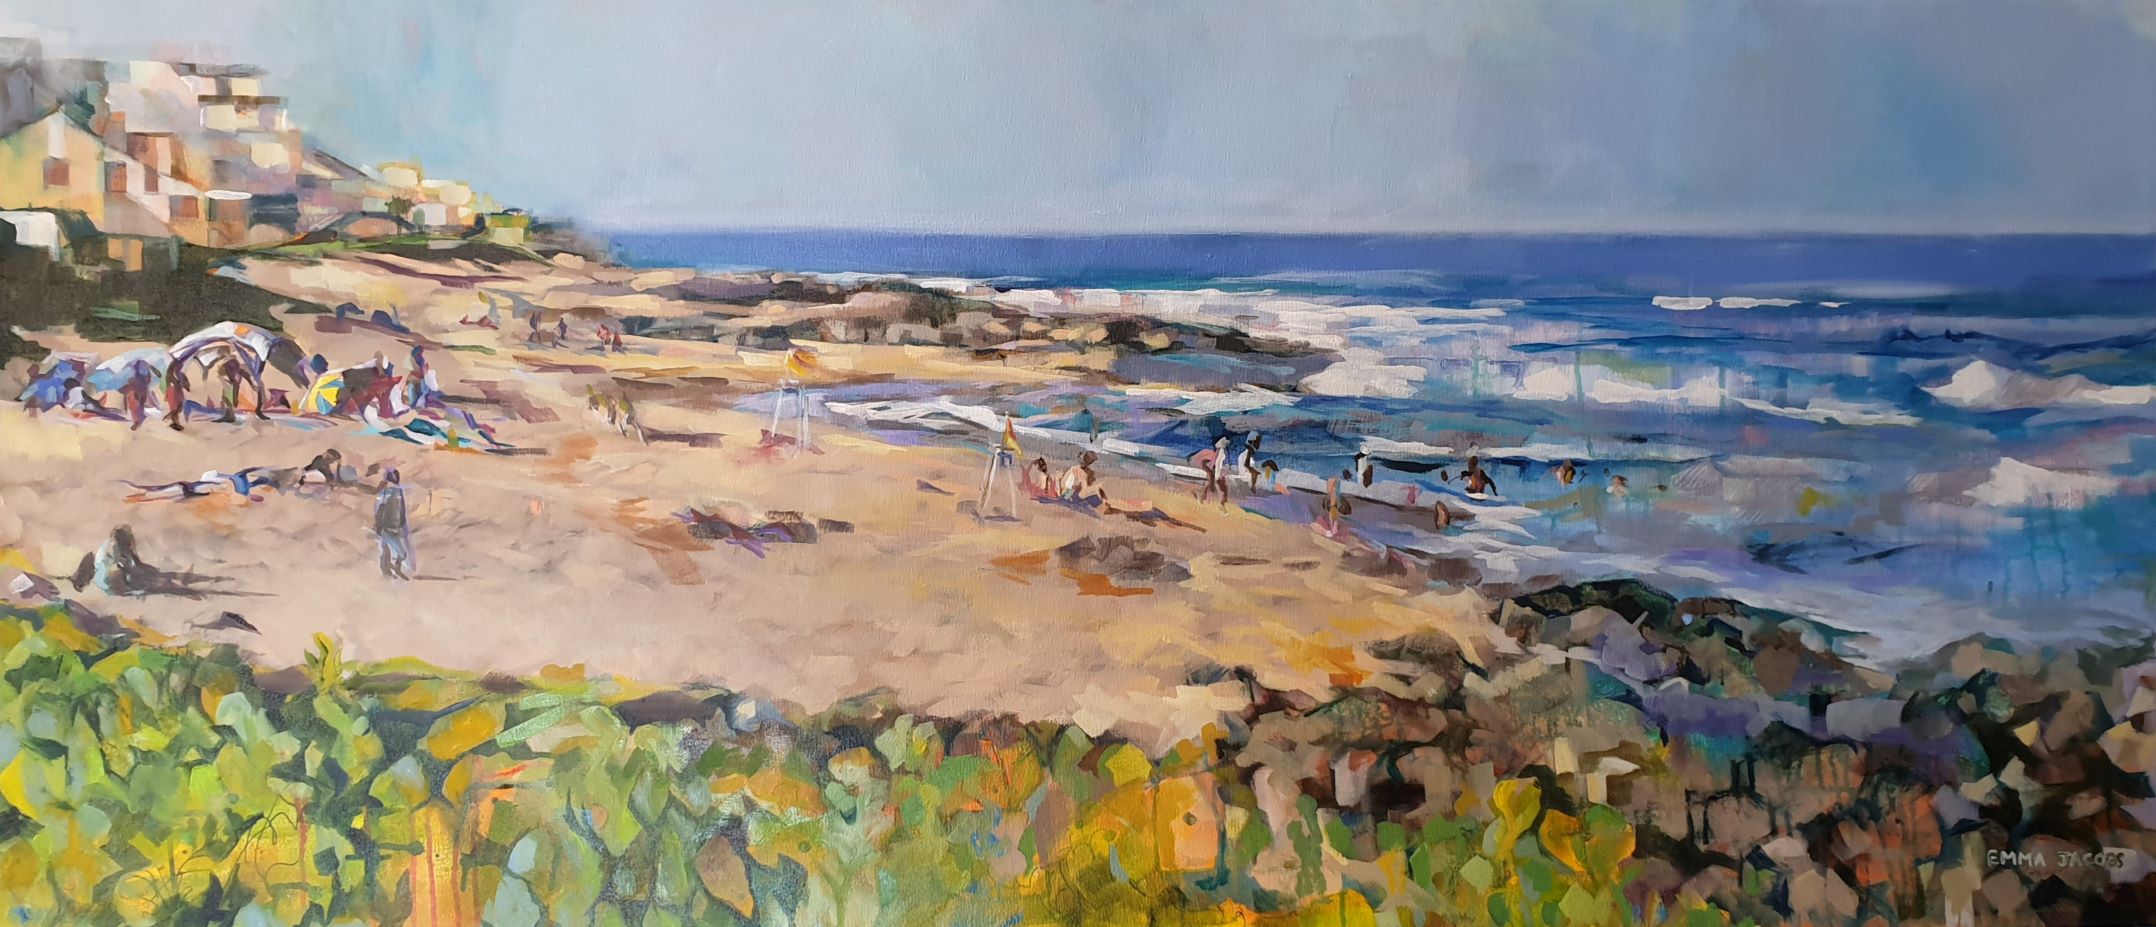 Painting of Ballito beach and apartments in the background with beachgoers and vendors